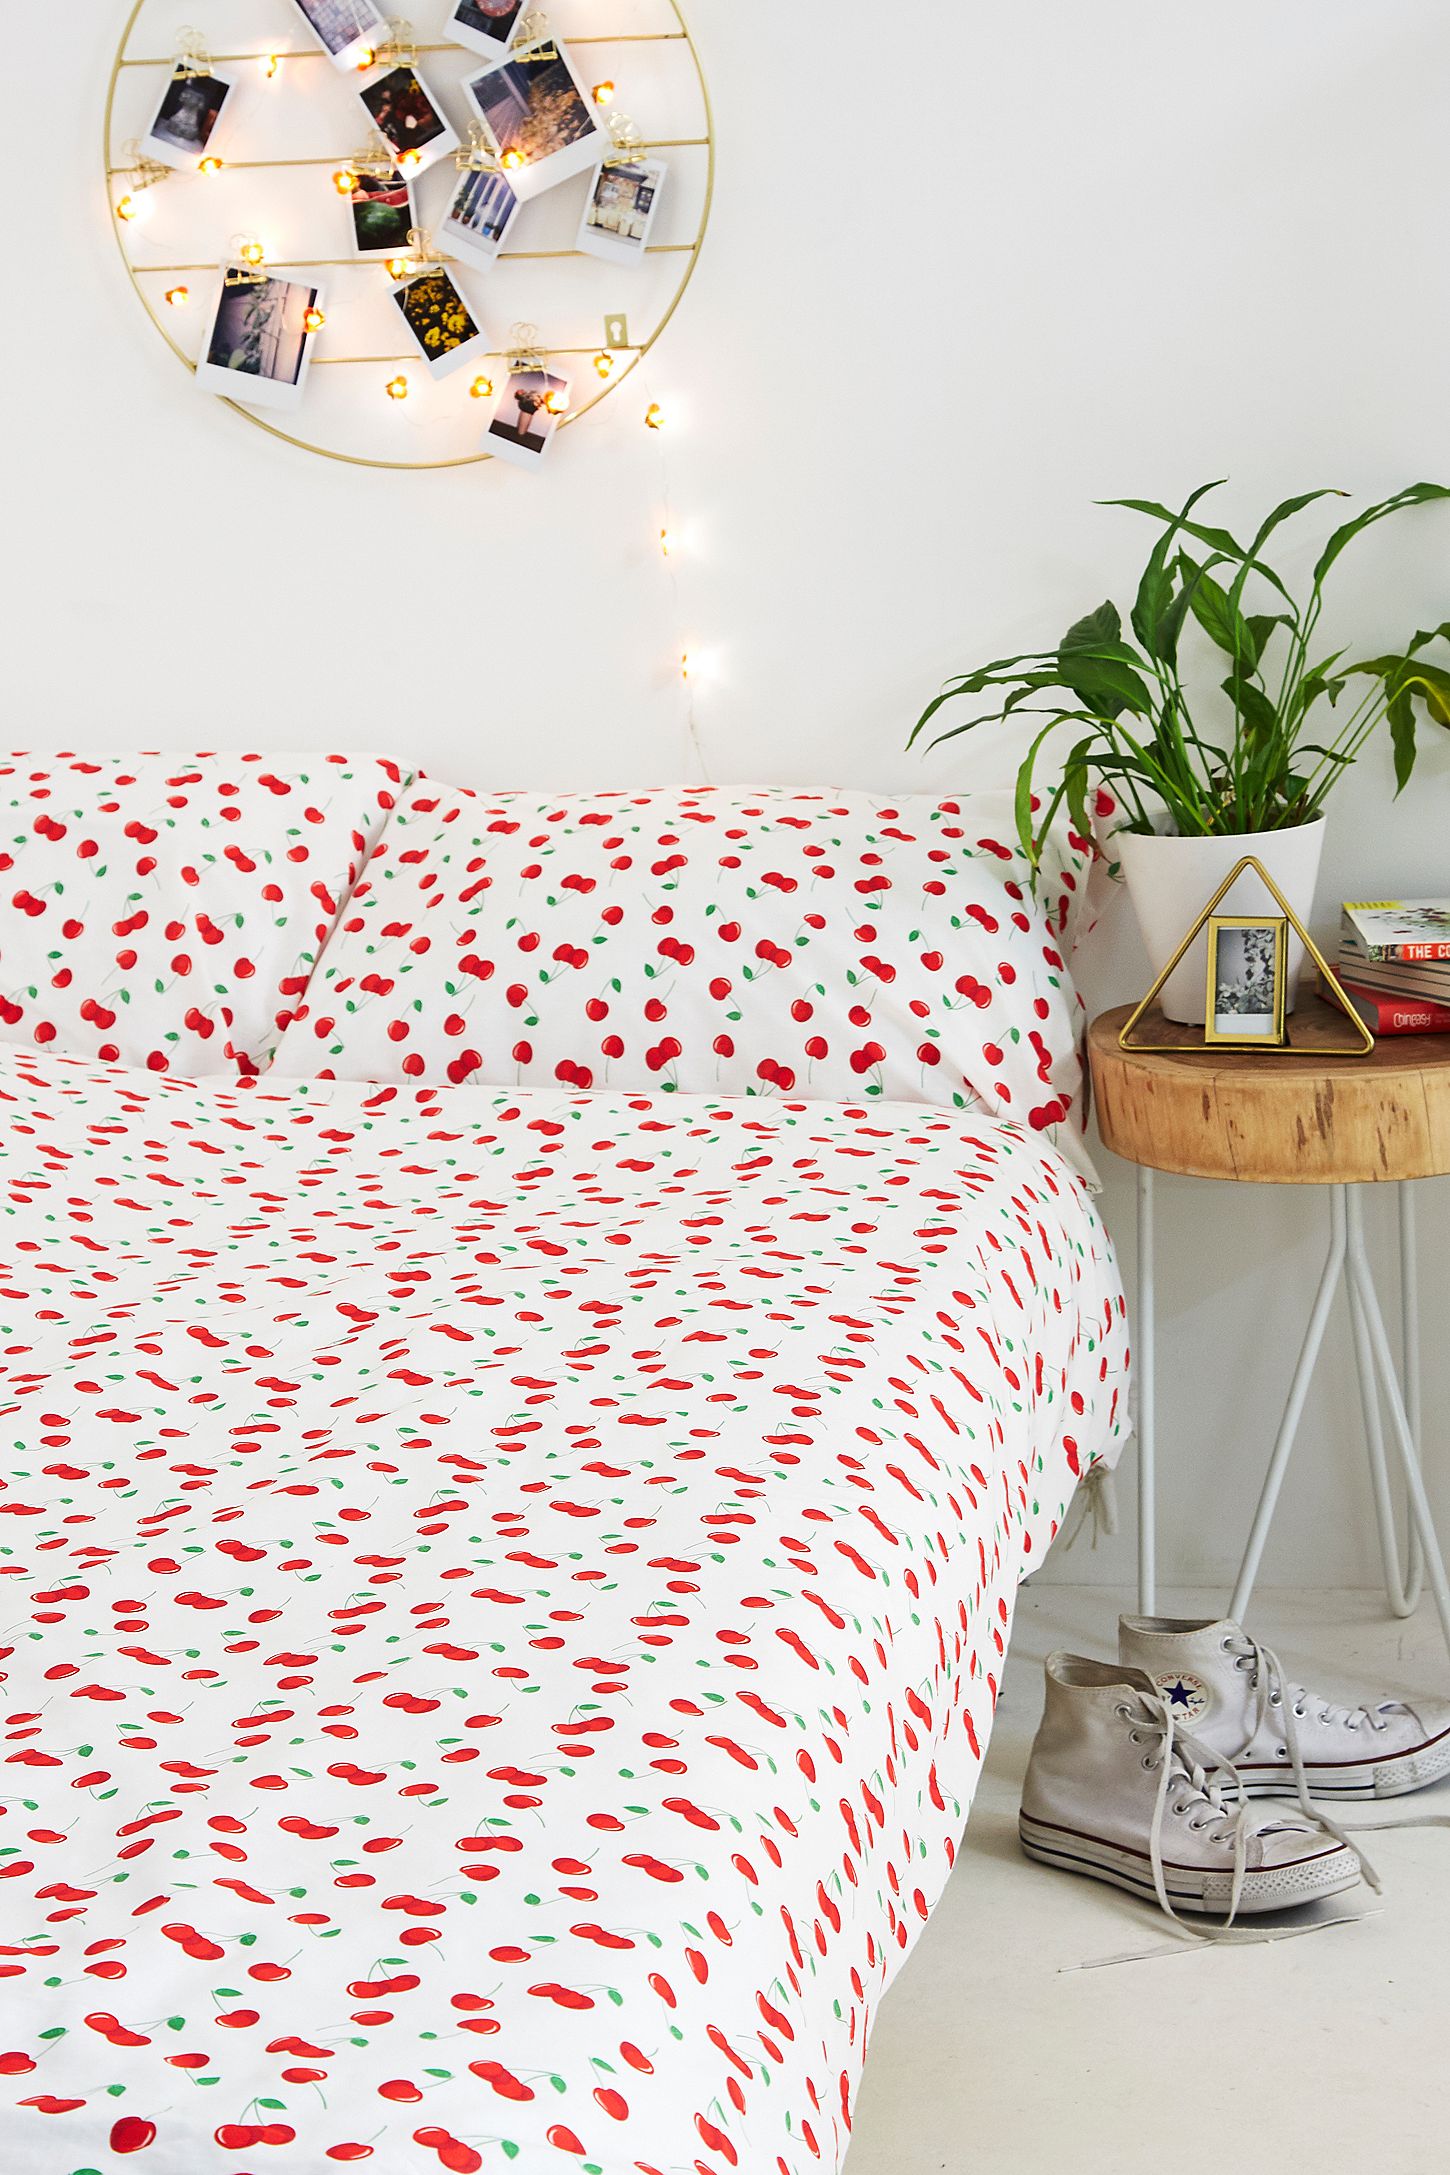 Cherry Print Duvet Cover Set Urban Outfitters Uk